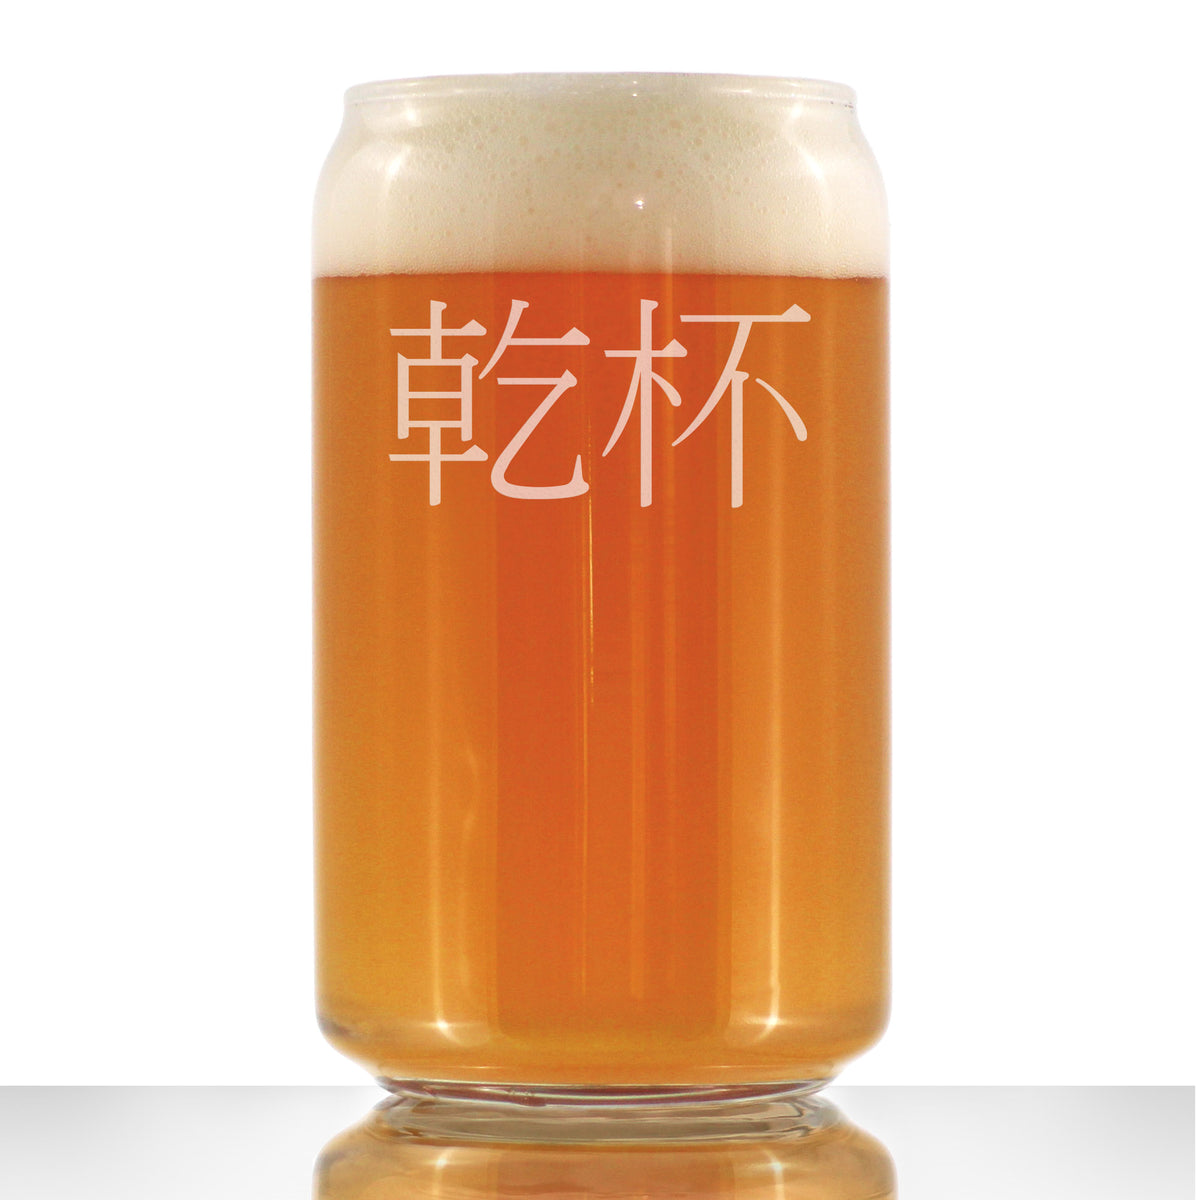 Cheers Japanese - 乾杯 - Kanpai - 16 Ounce Beer Can Pint Glass